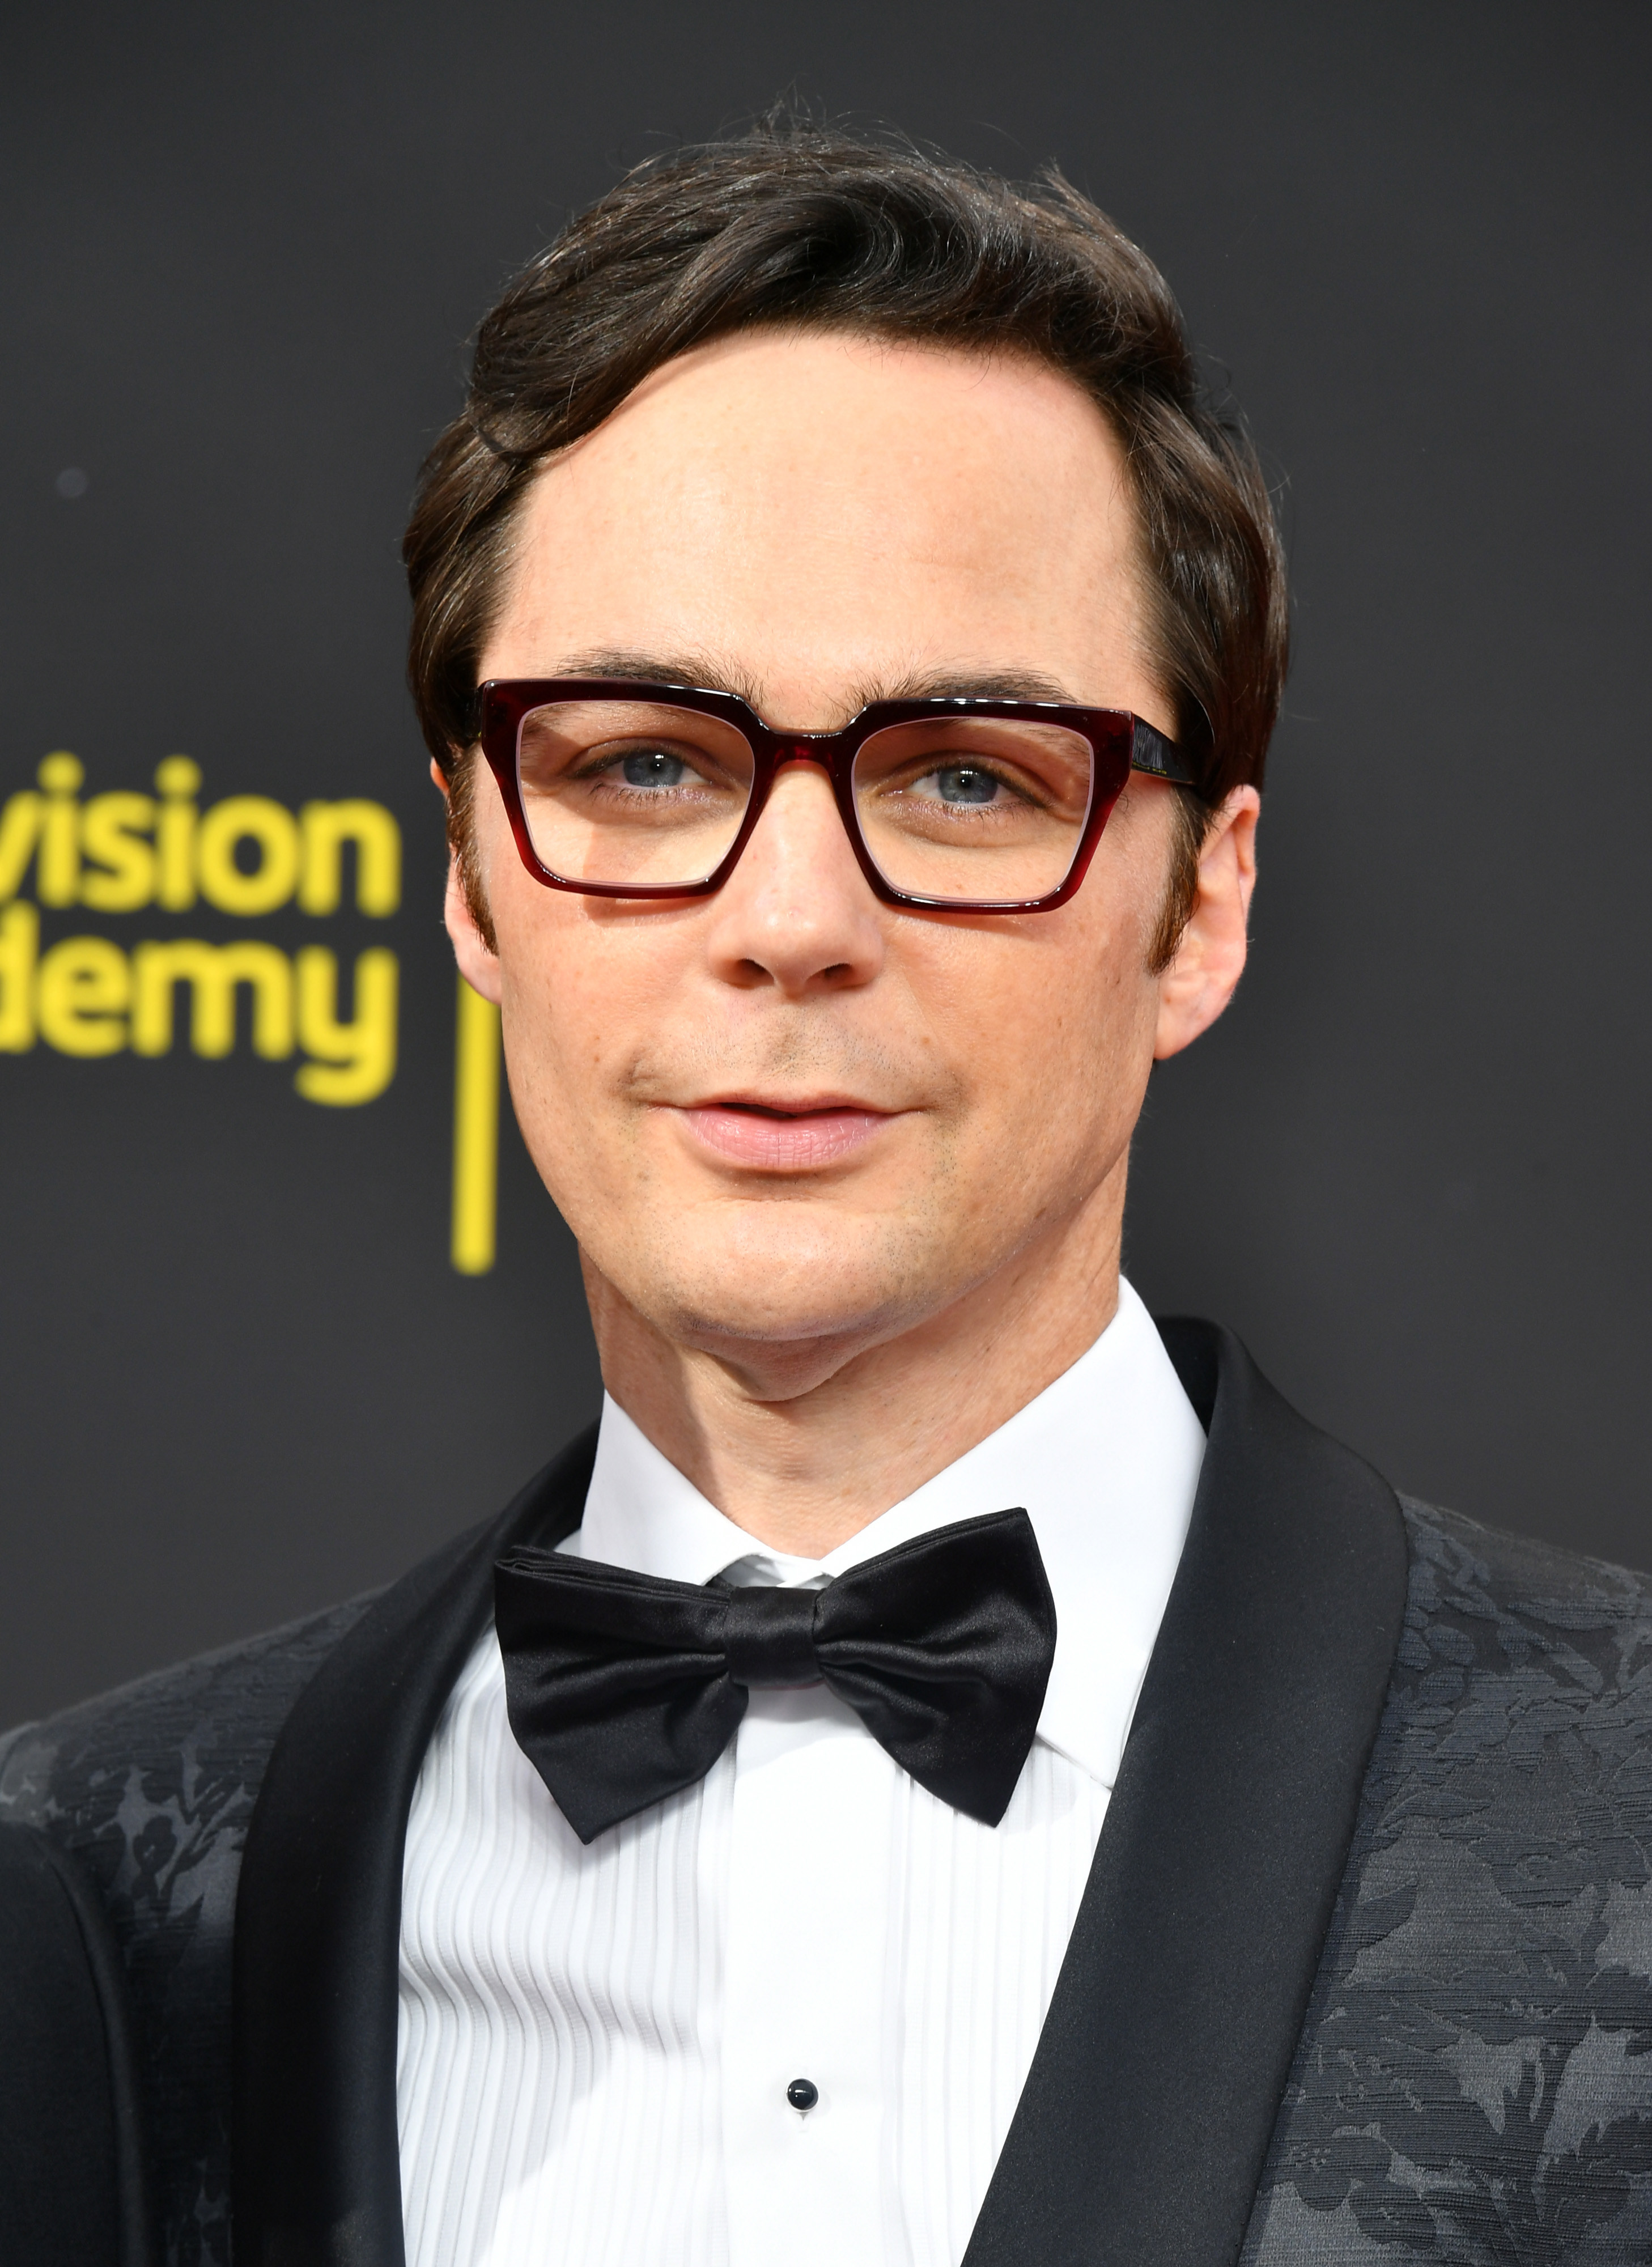 Clean-shaven Jim wearing glasses and in a bow tie and suit